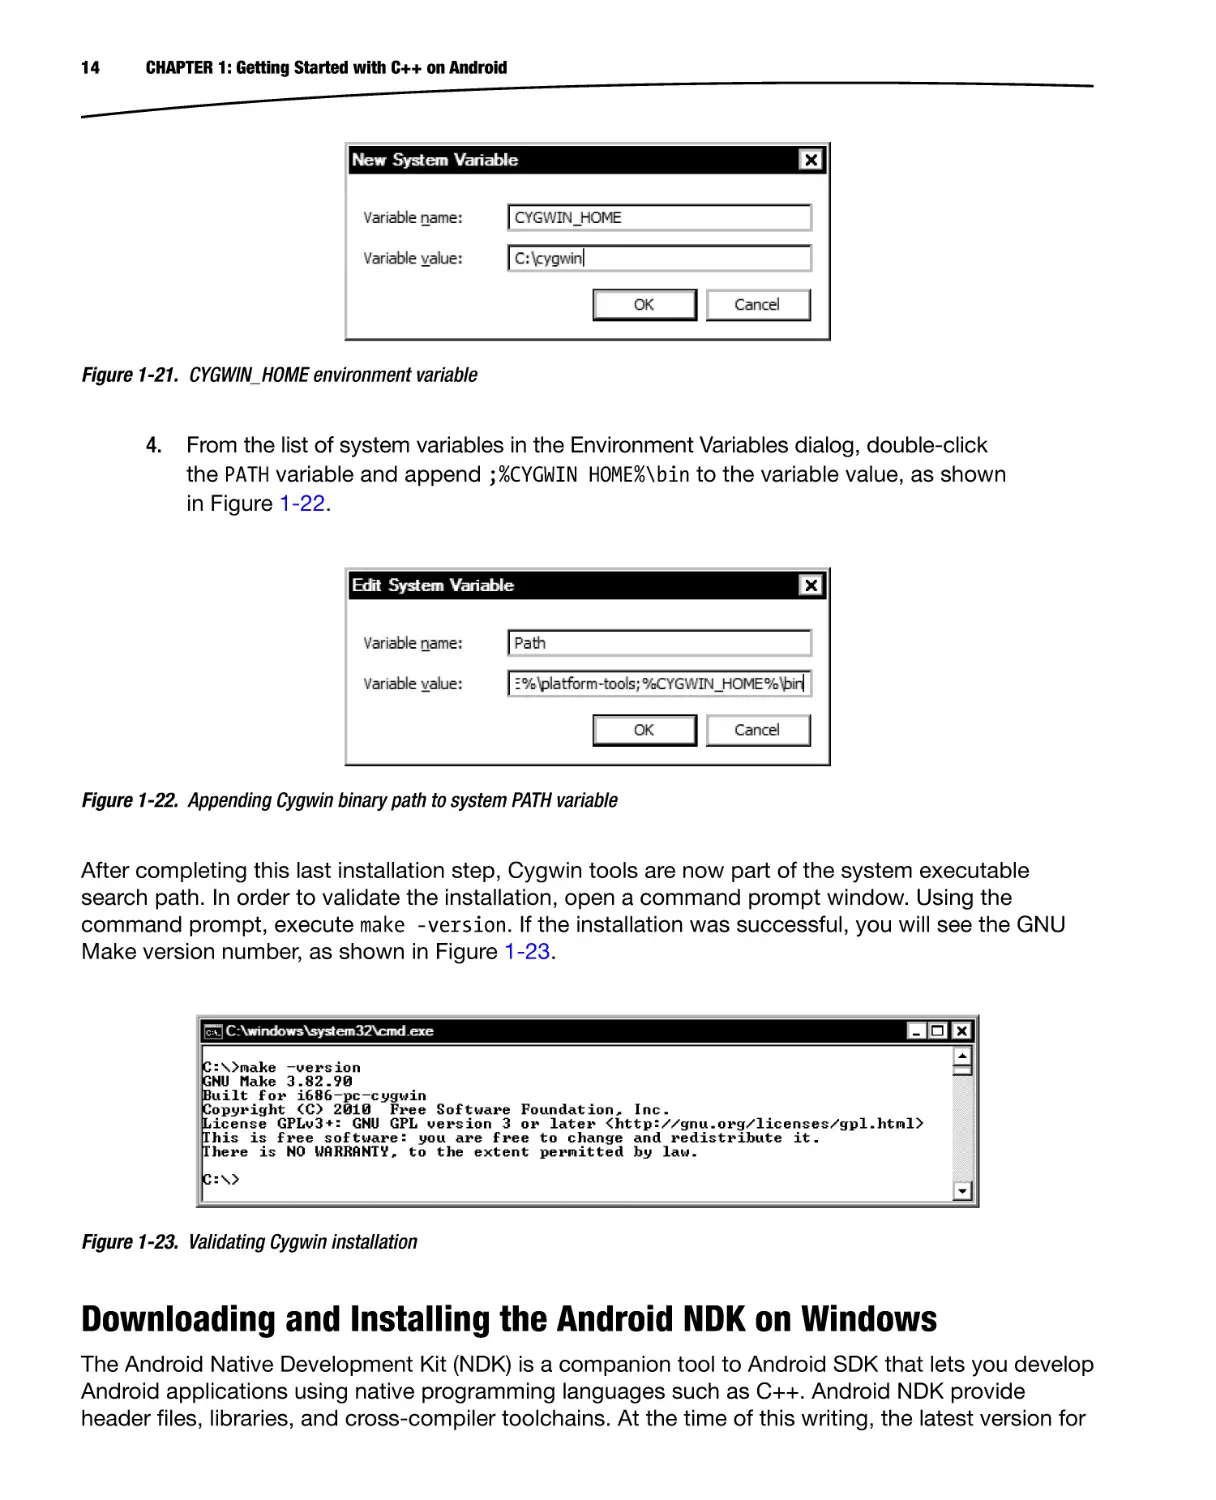 Downloading and Installing the Android NDK on Windows